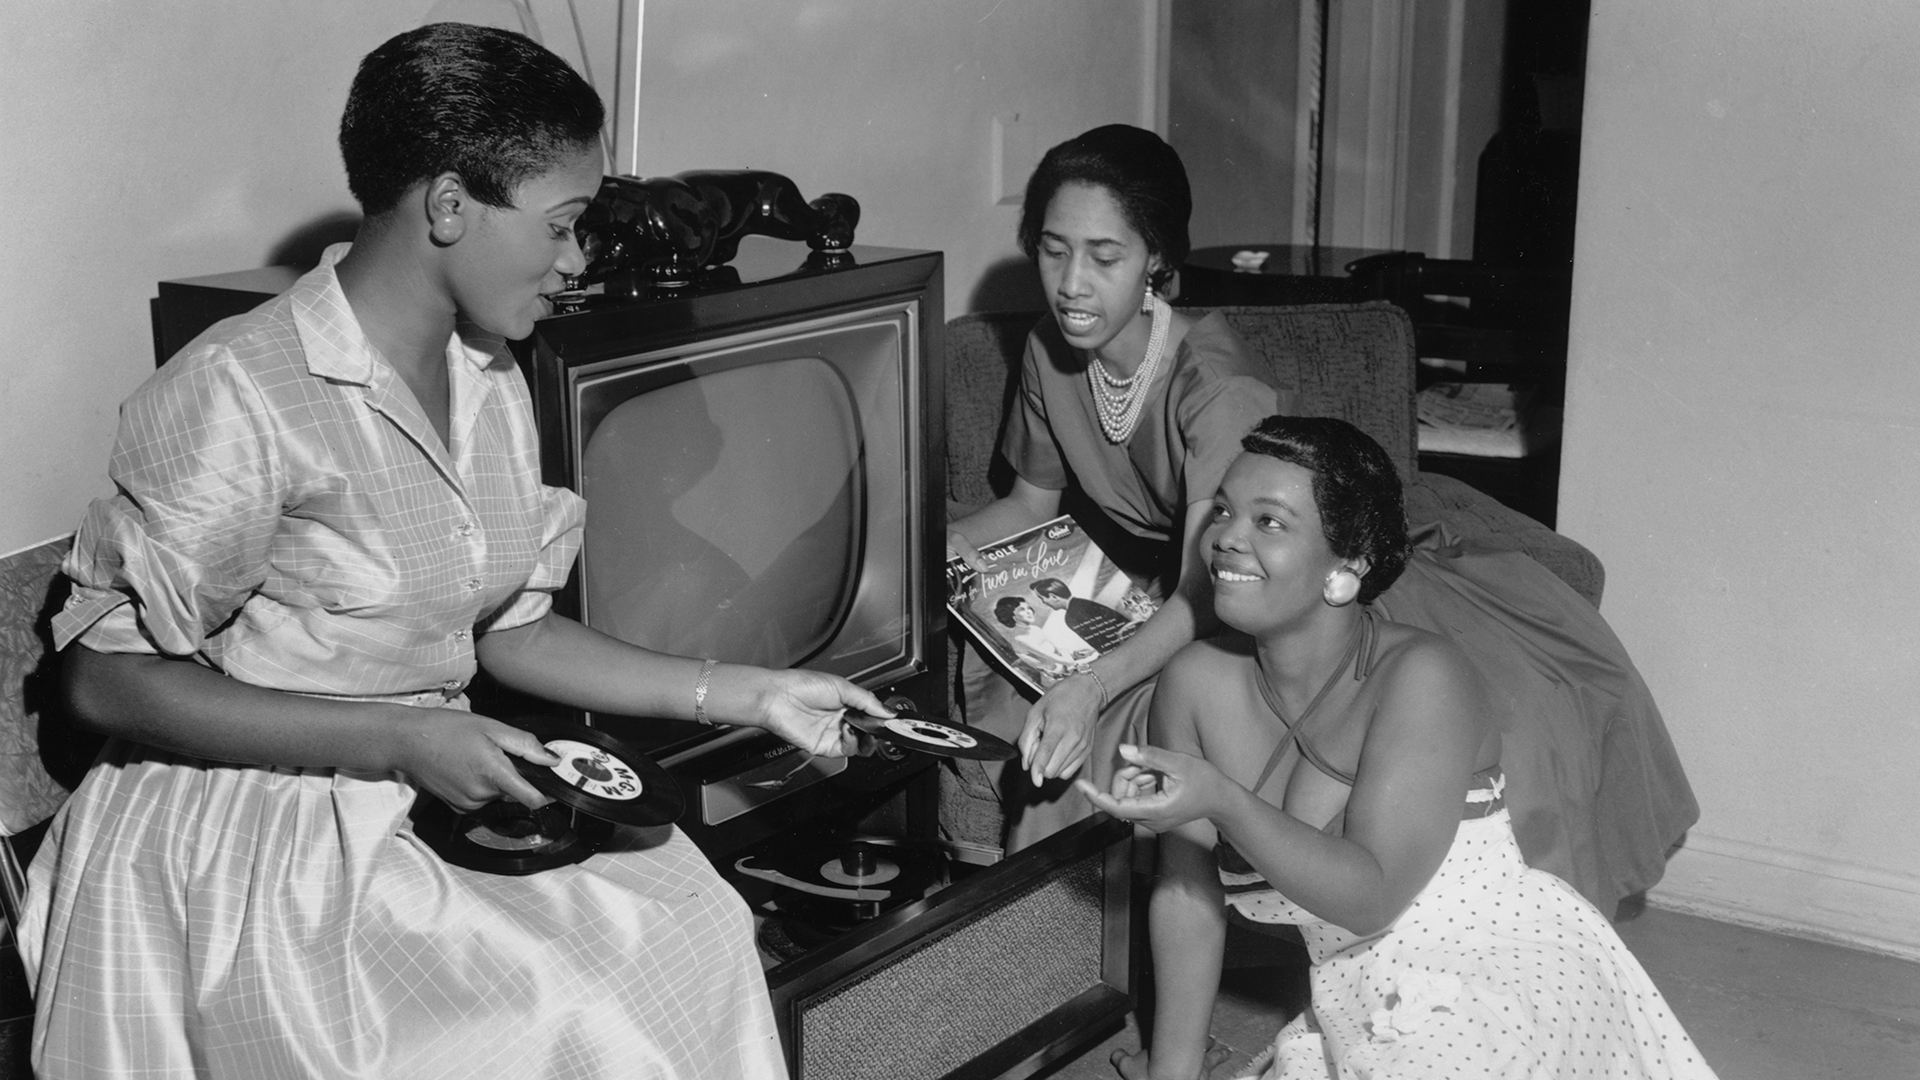 A group of women discuss vinyl records in a black and white picture taken in the 1940s or 1950s.